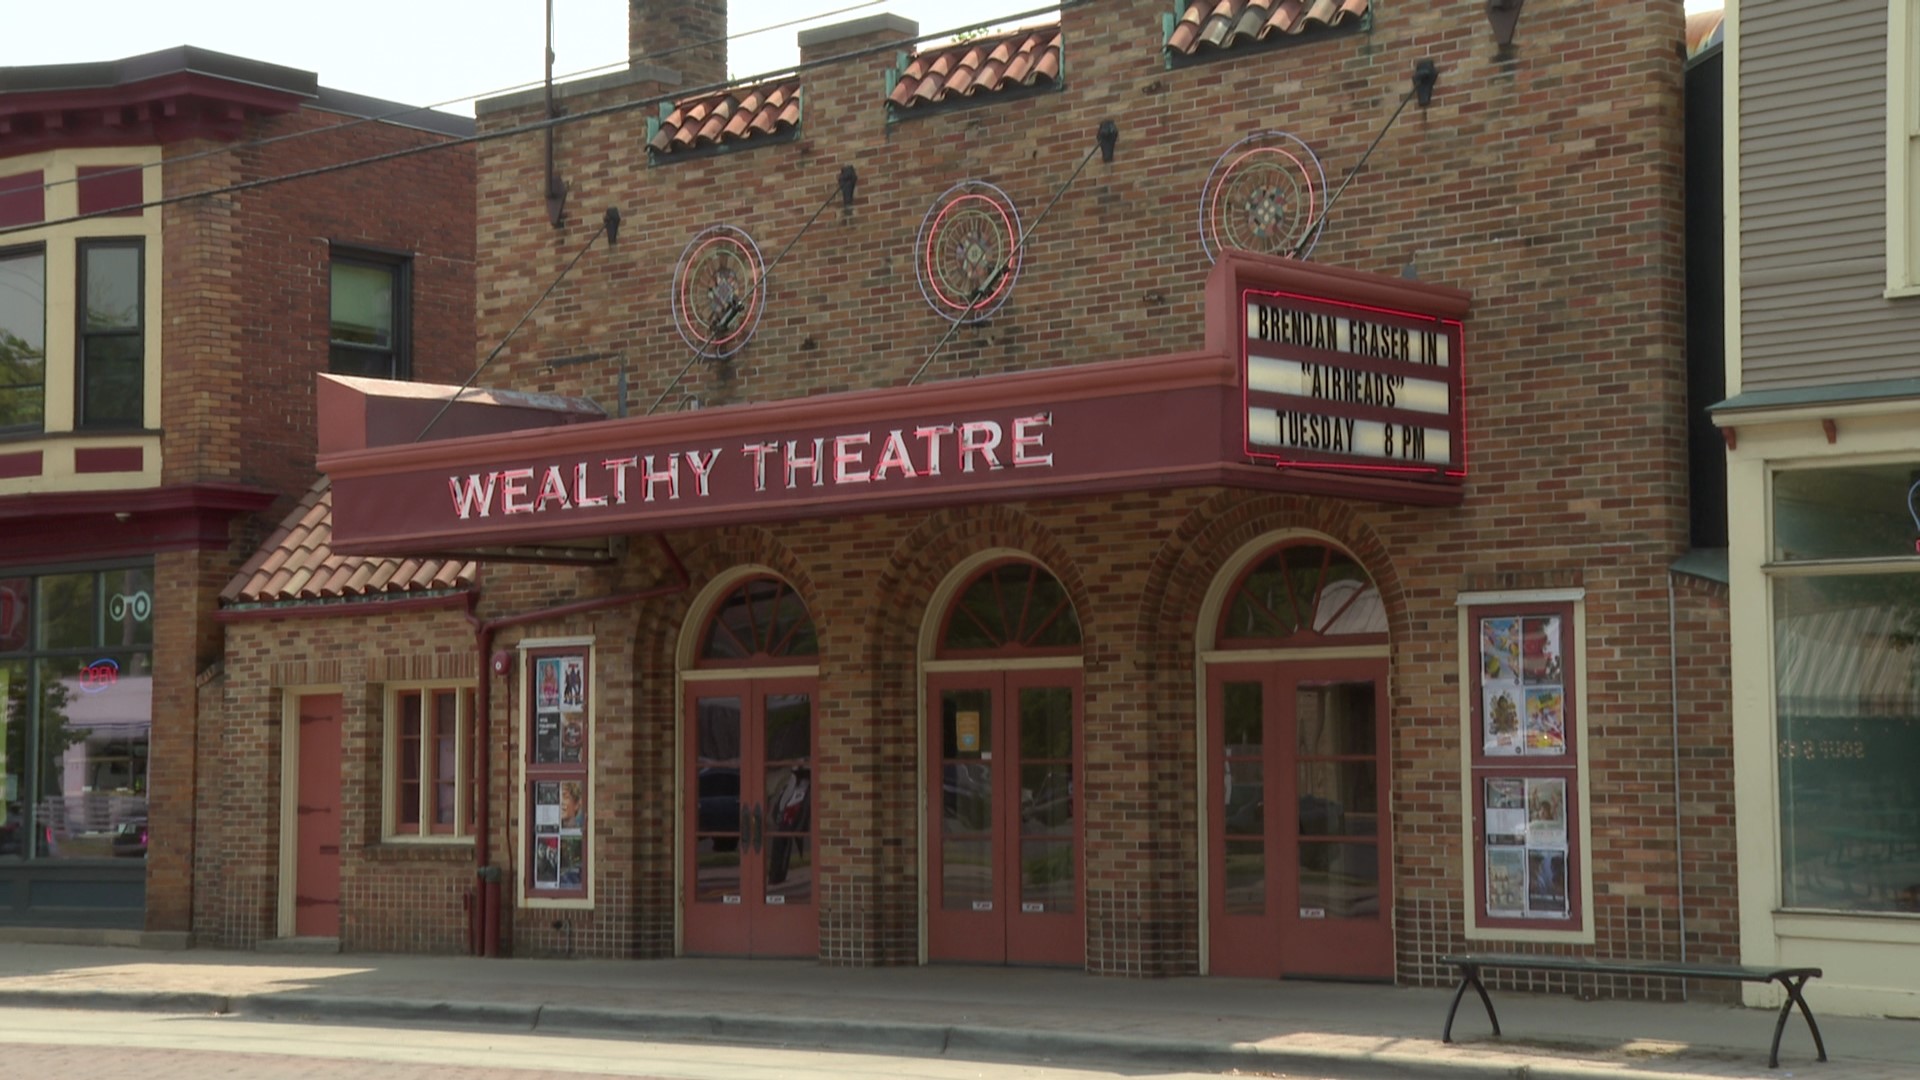 Open Projector Night returns to the Wealthy Street Theatre Wednesday to showcase short films with a Michigan connection.